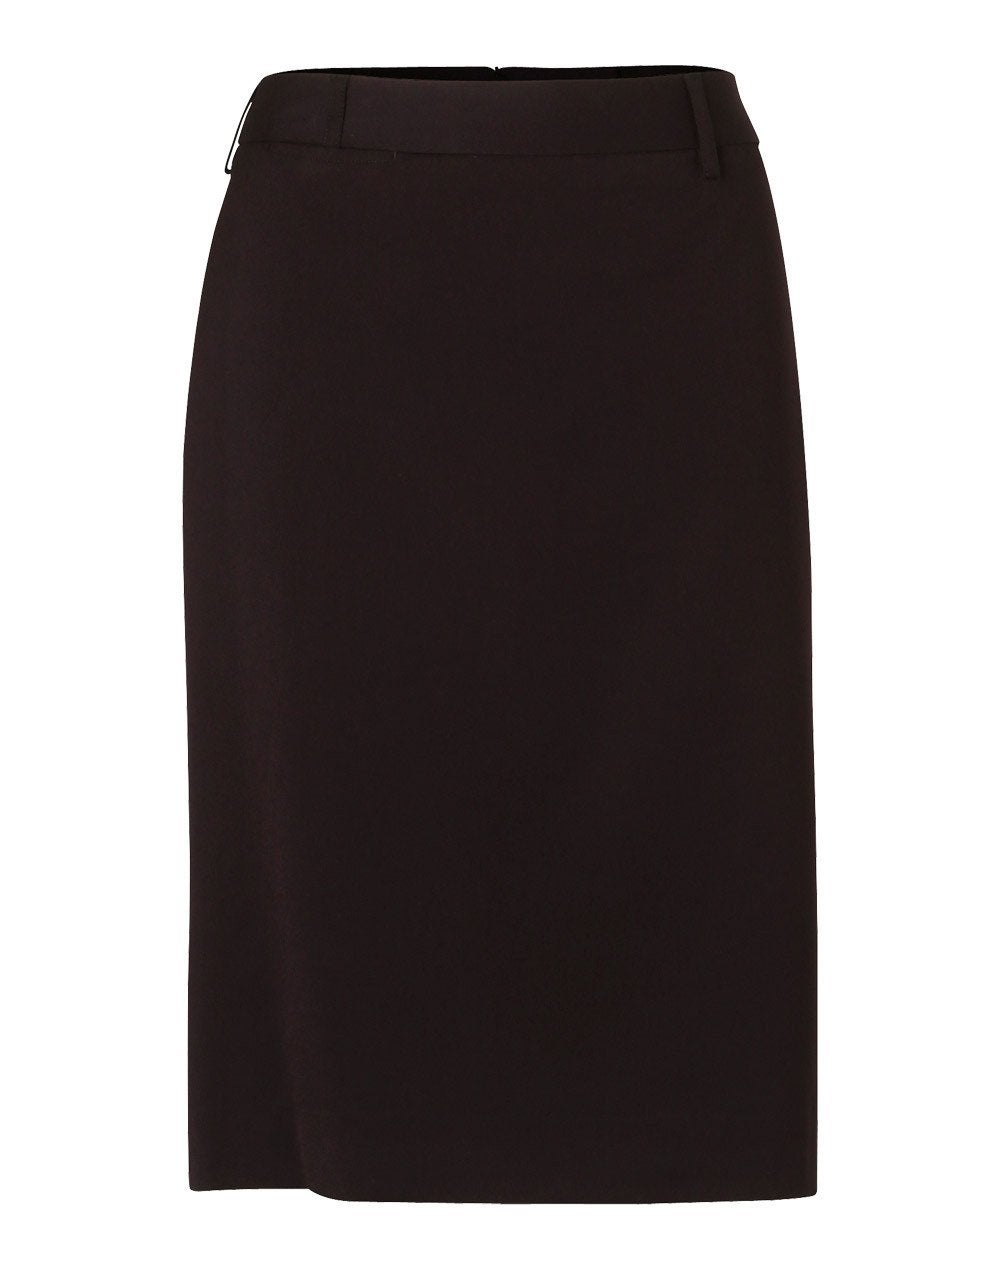 Stretch Mid Length Lined Pencil Skirt